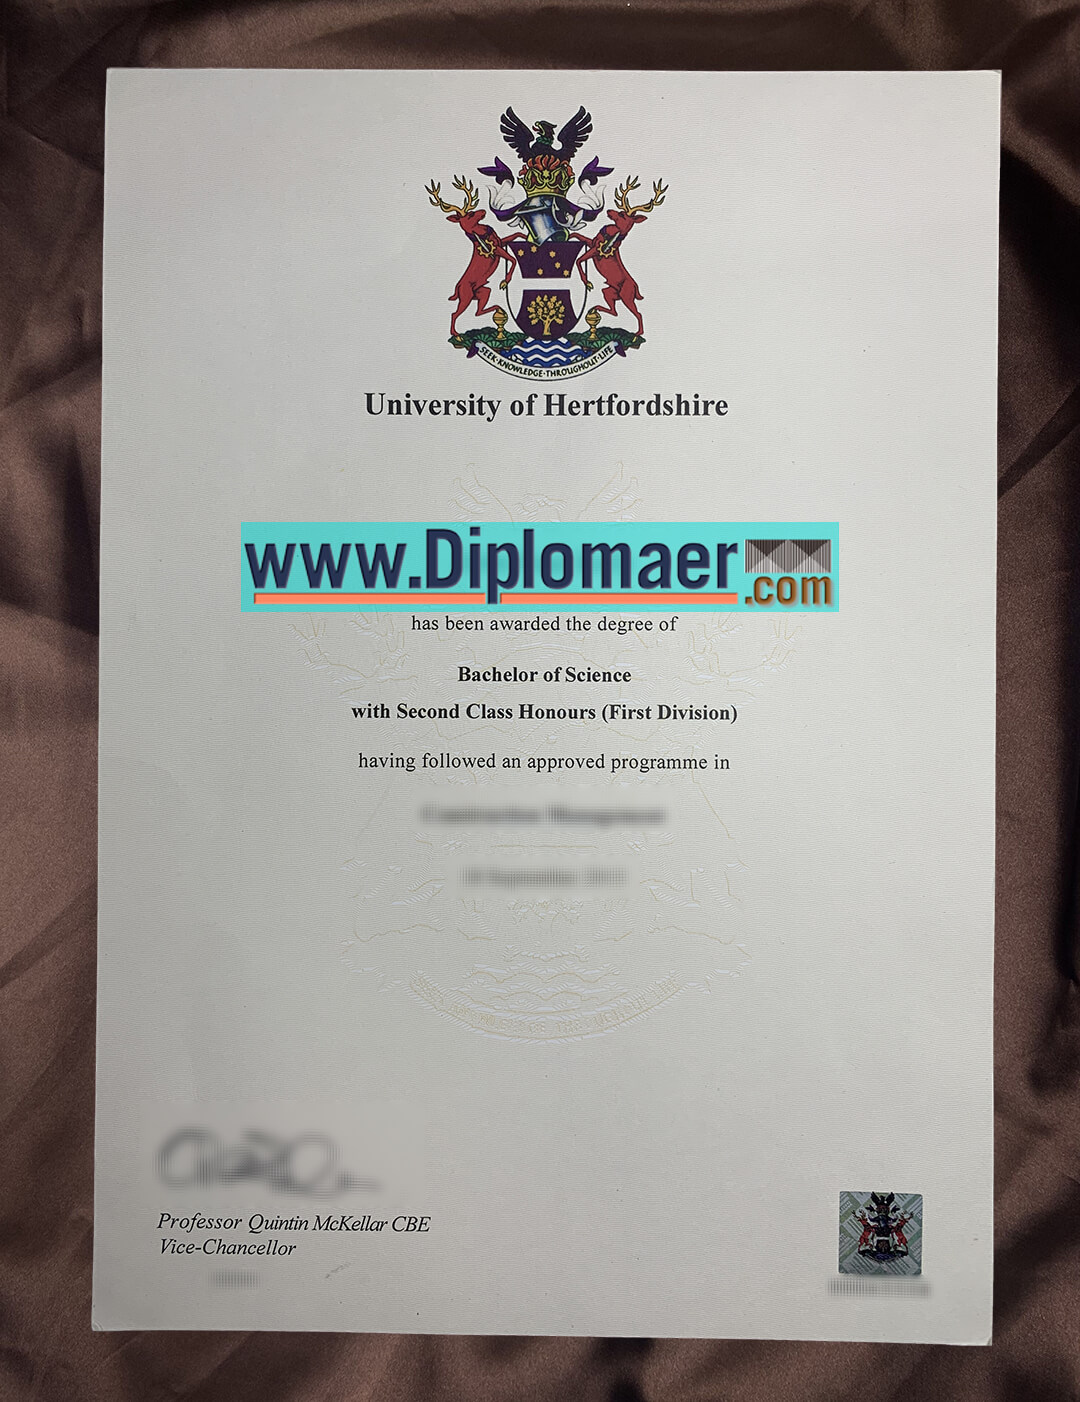 University of Herfordshire Fake Diploma - Can fake University of Hertfordshire diplomas be bought in the UK?